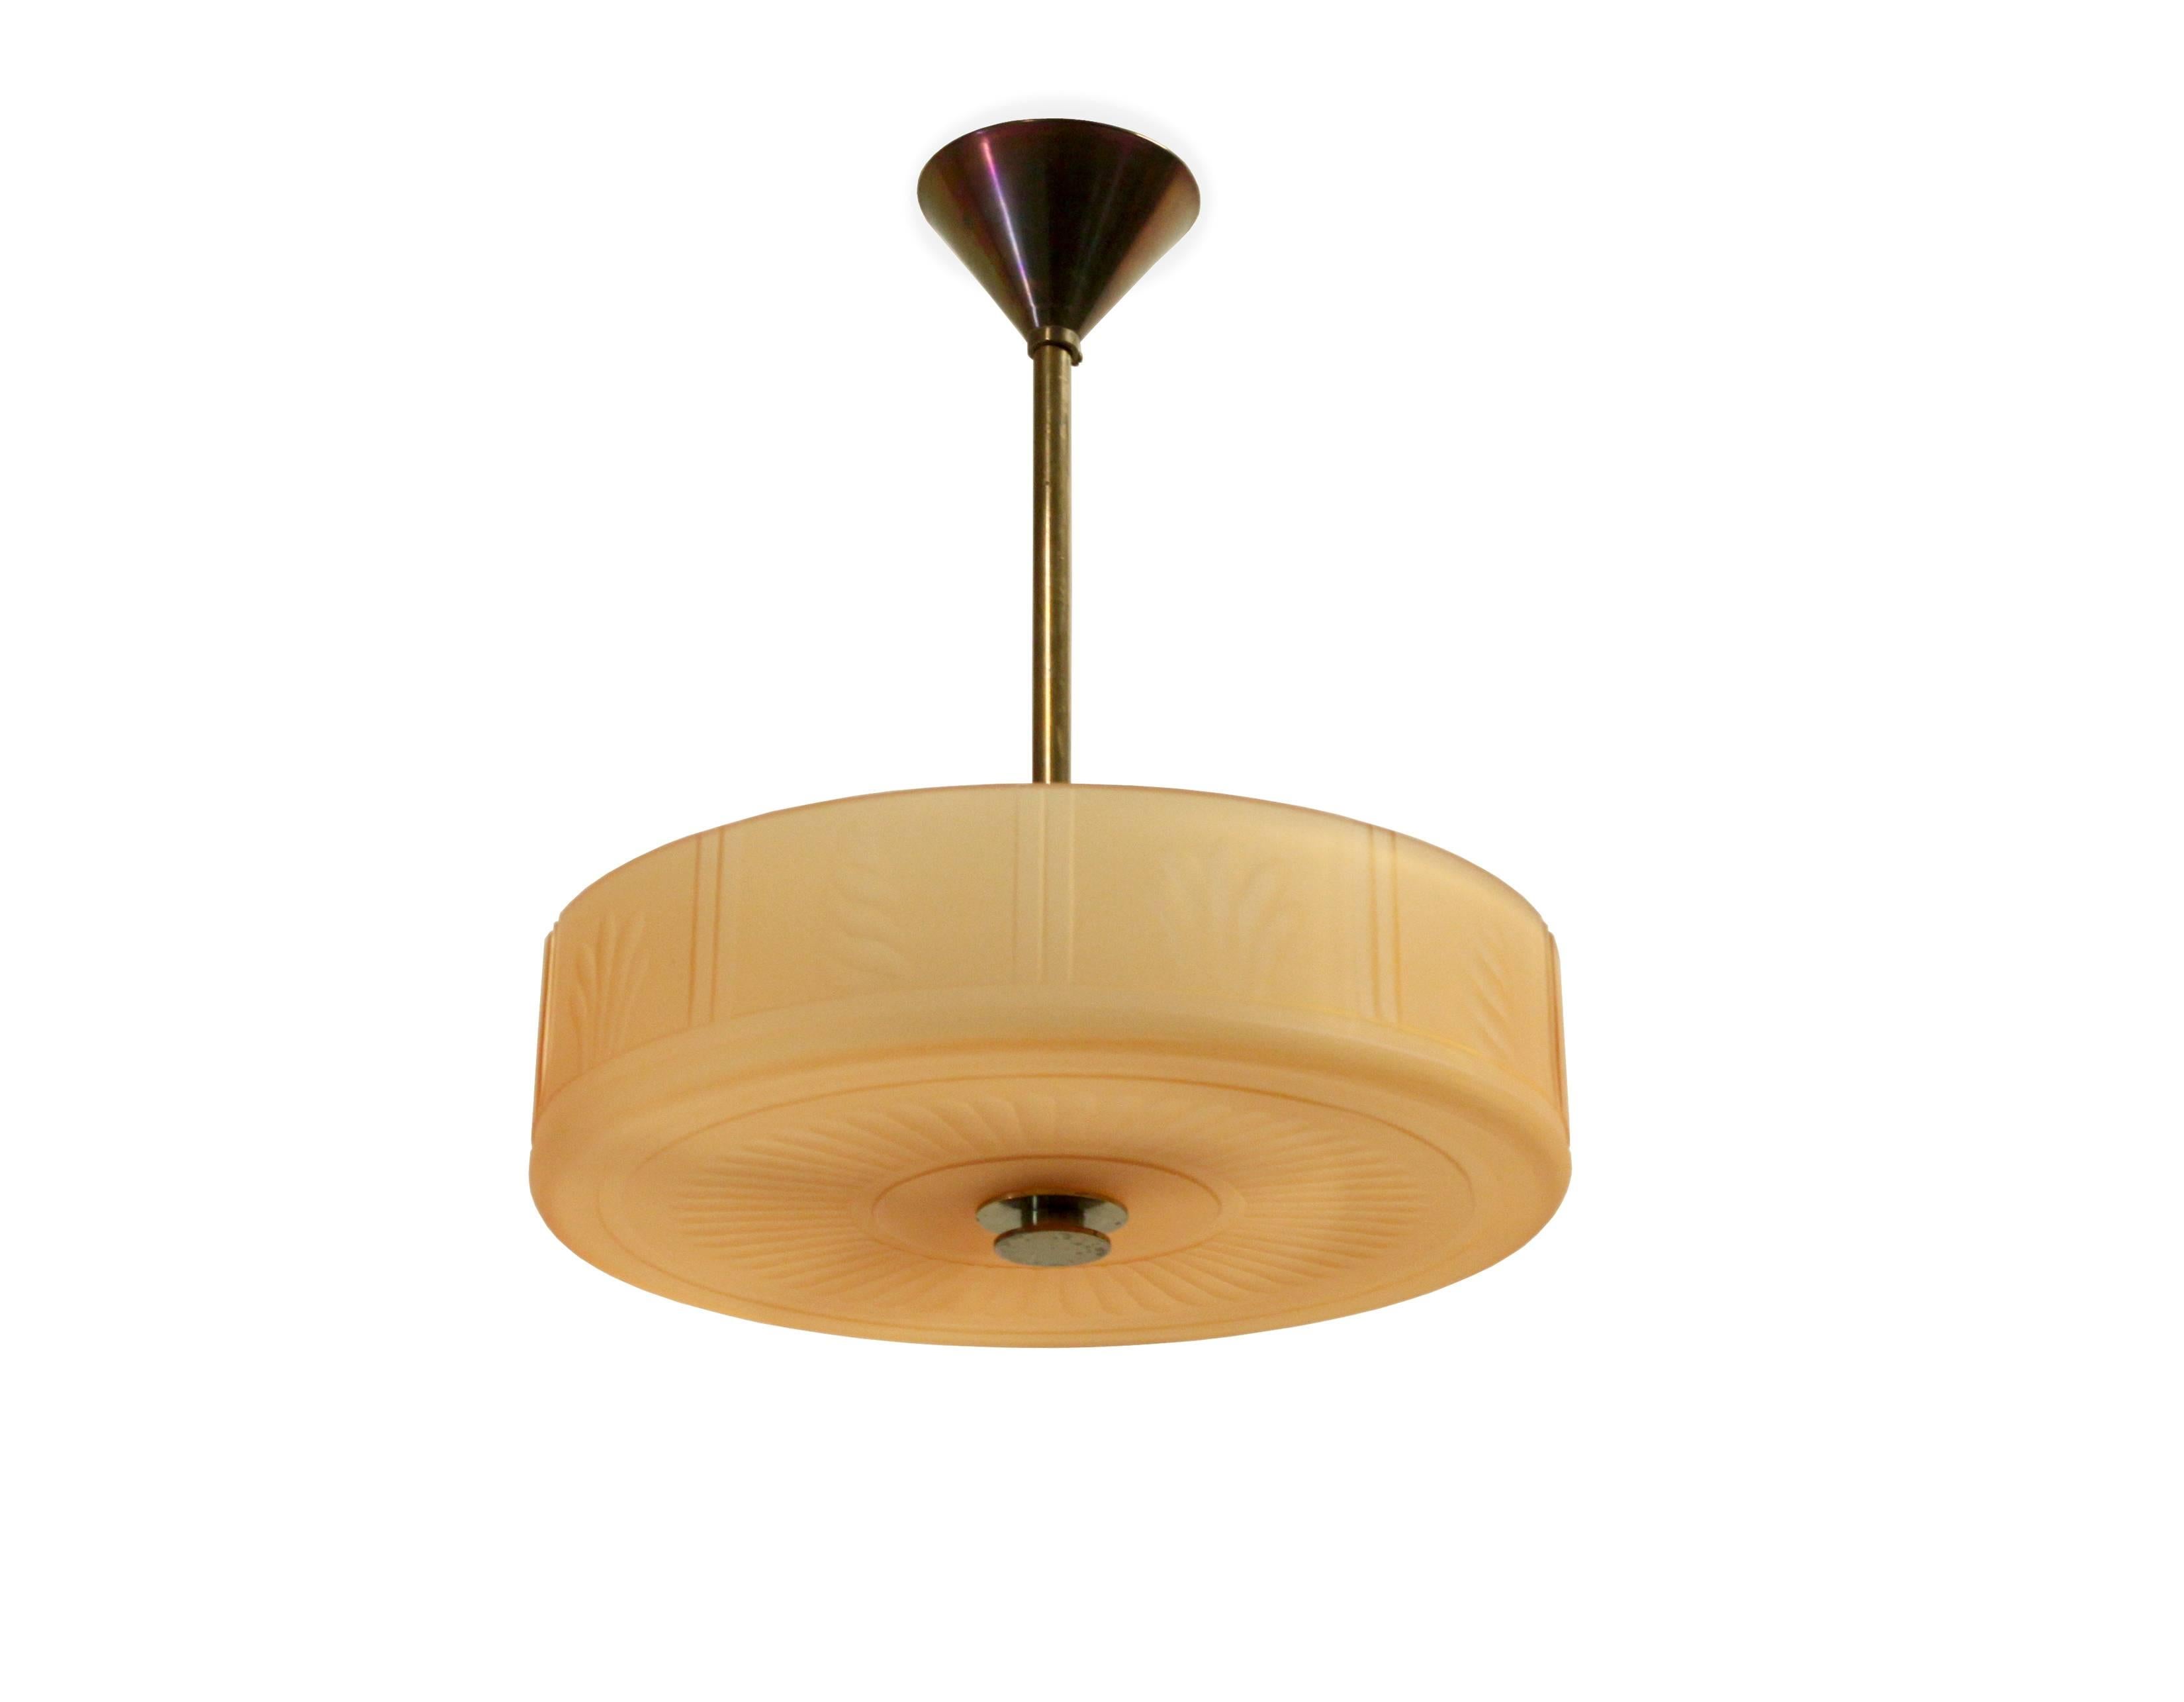 Wonderful and decorative ceiling lamp in Havana glass and brass stem. Designed and made in Sweden by Orrefors from circa 1930s second half. The lamp is fully working and in excellent vintage condition.